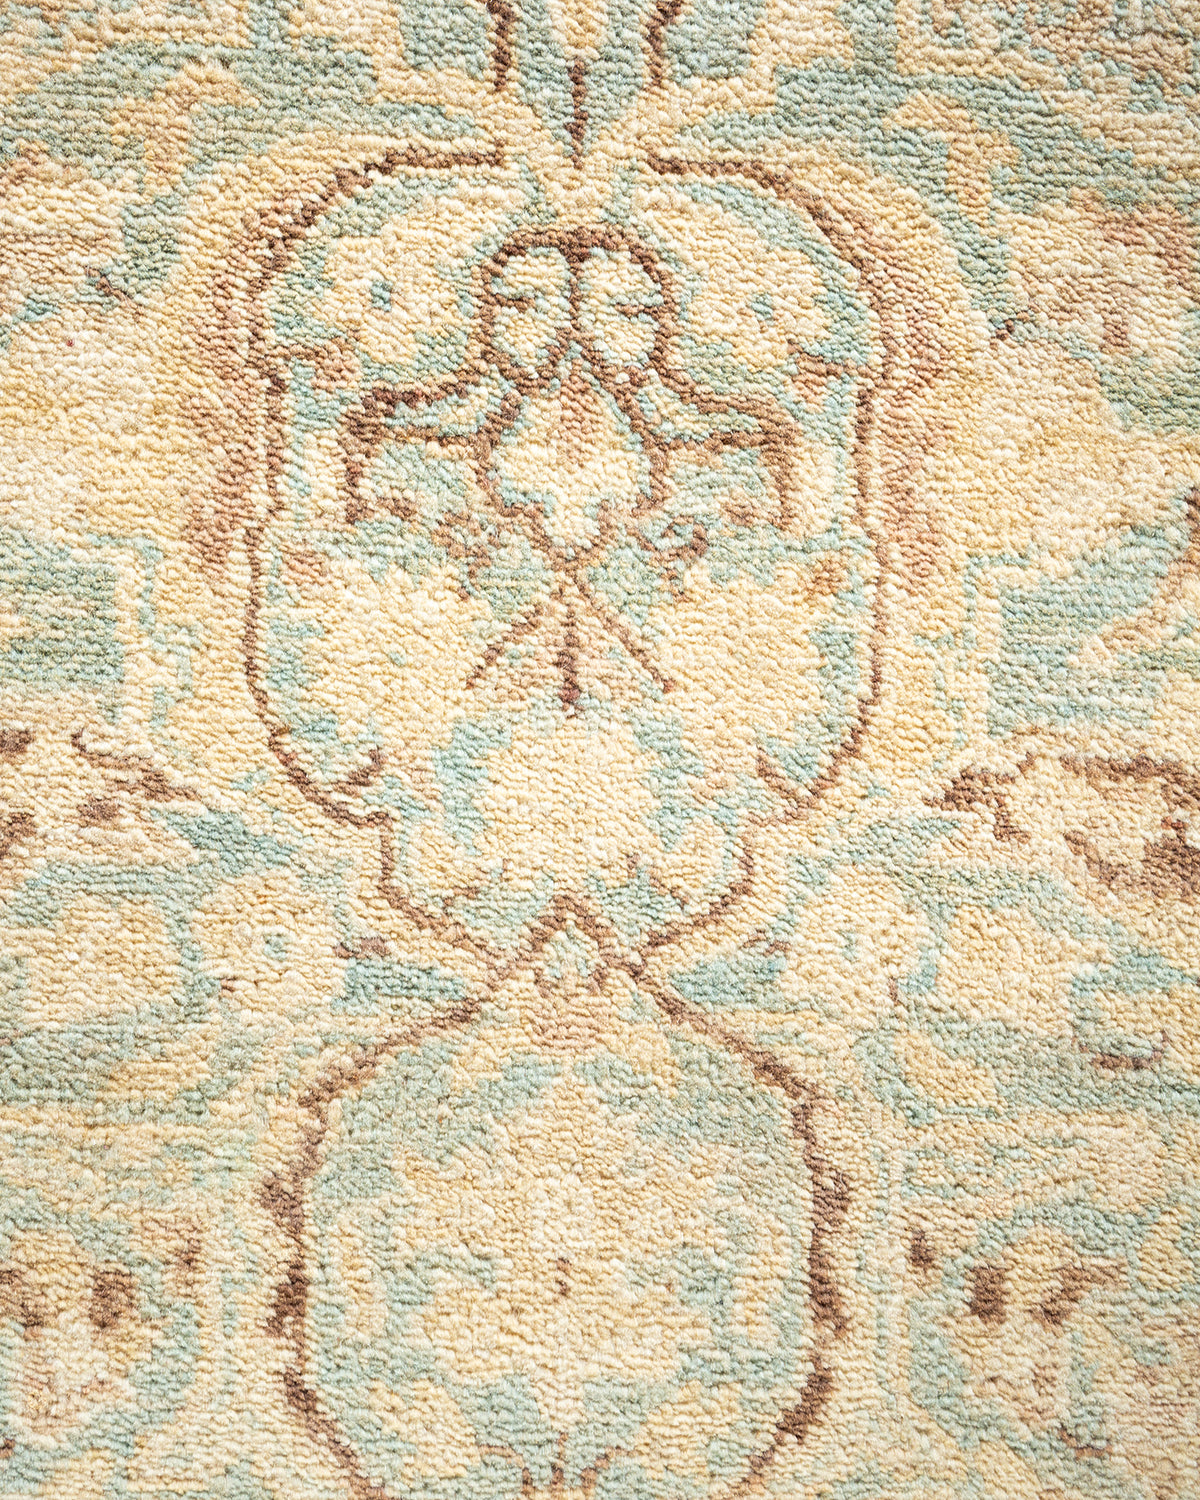 Eclectic, One-of-a-Kind Hand-Knotted Area Rug  - Light Blue,  8' 3" x 10' 4"